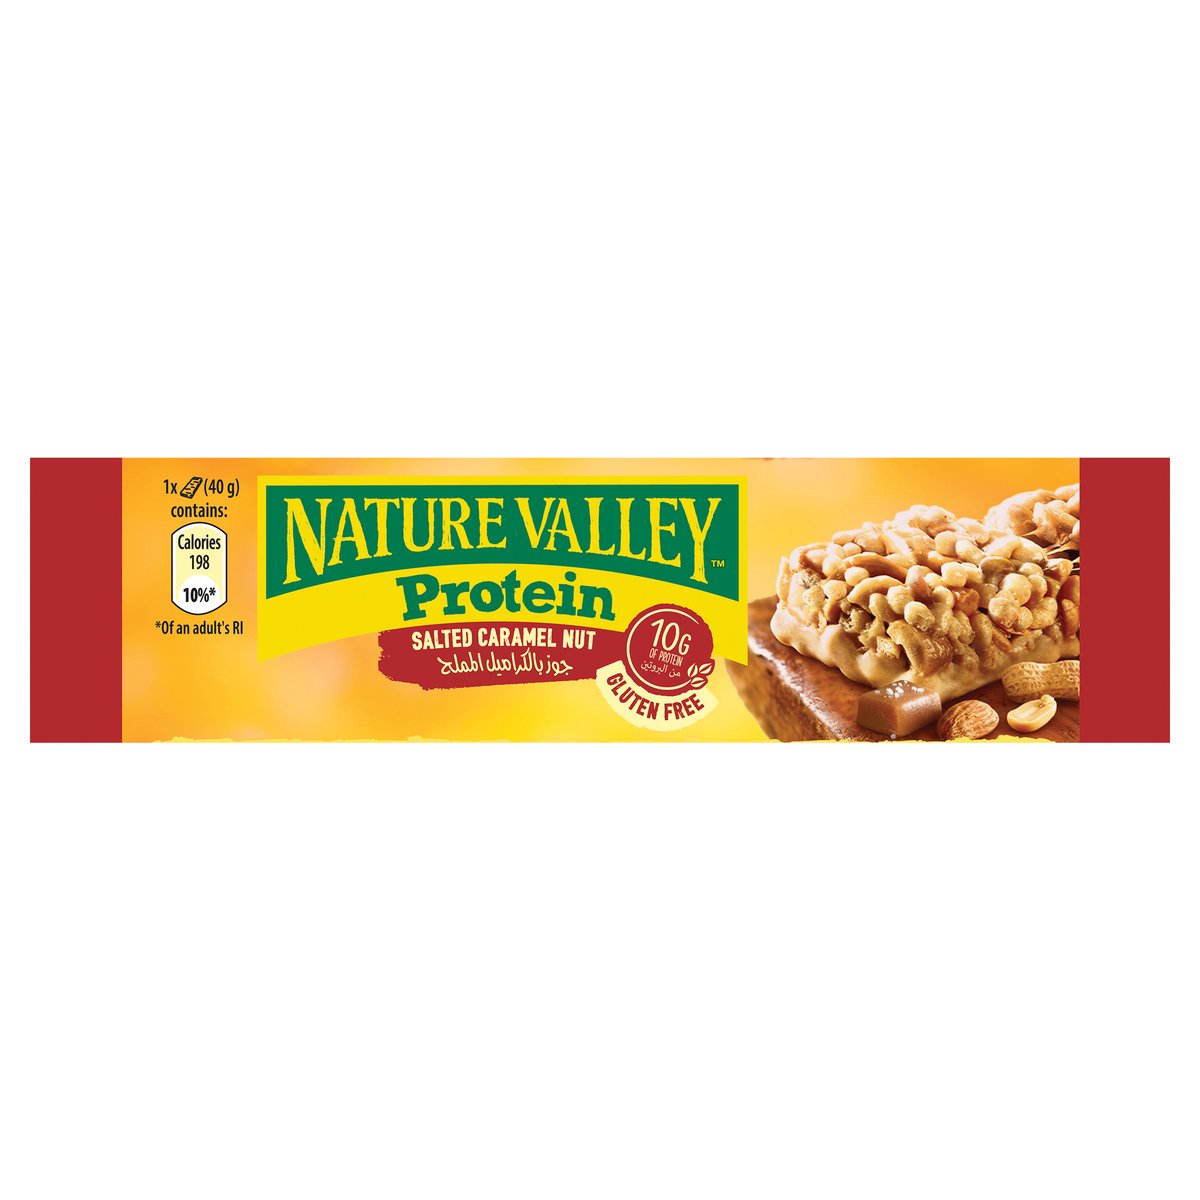 Nature Valley Salted Caramel Nut Protein Bar 40 g